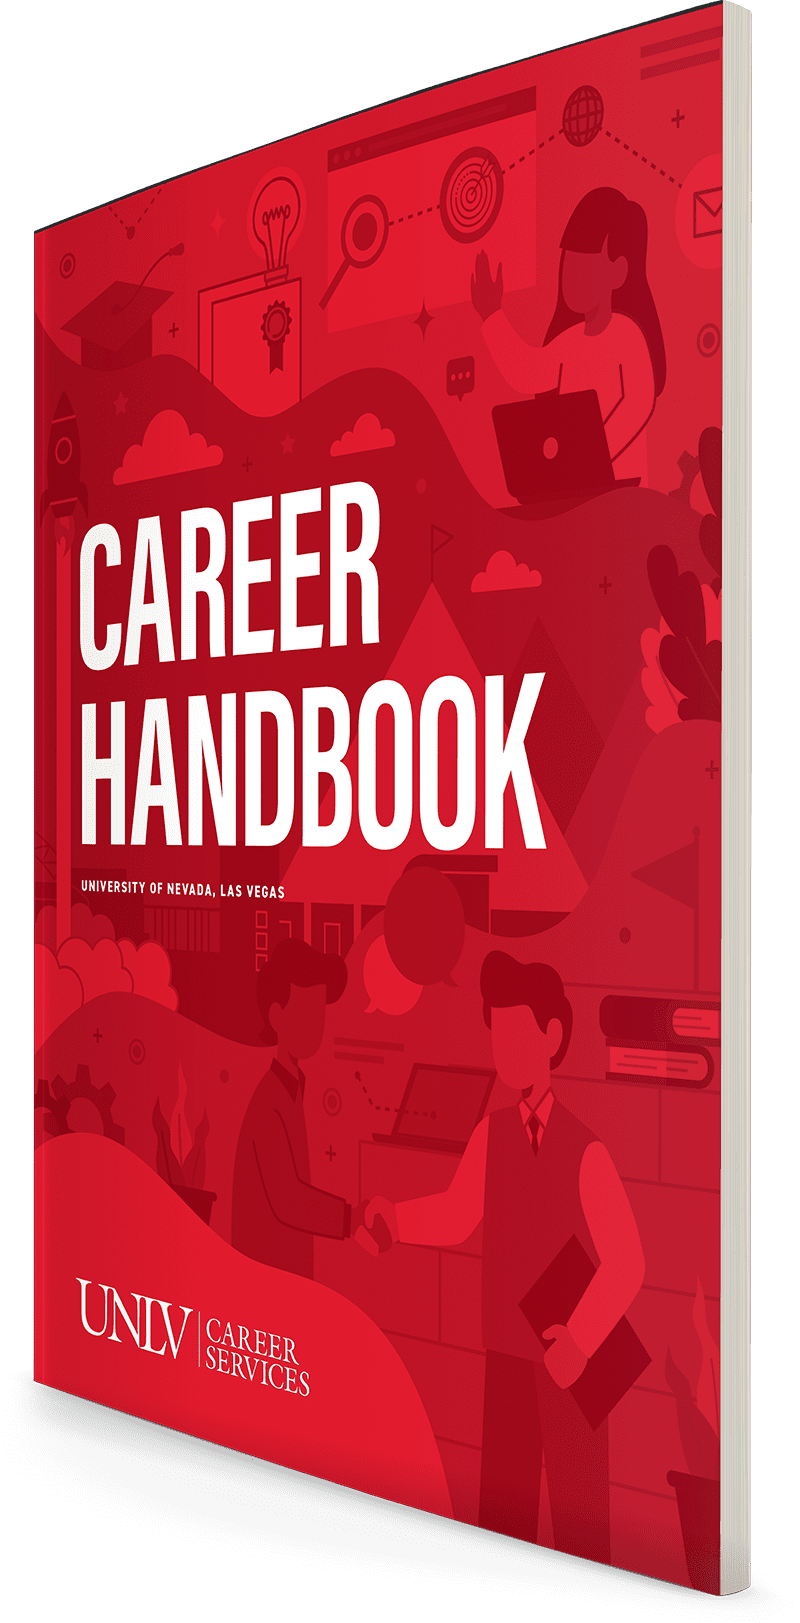 Career Guide Cover